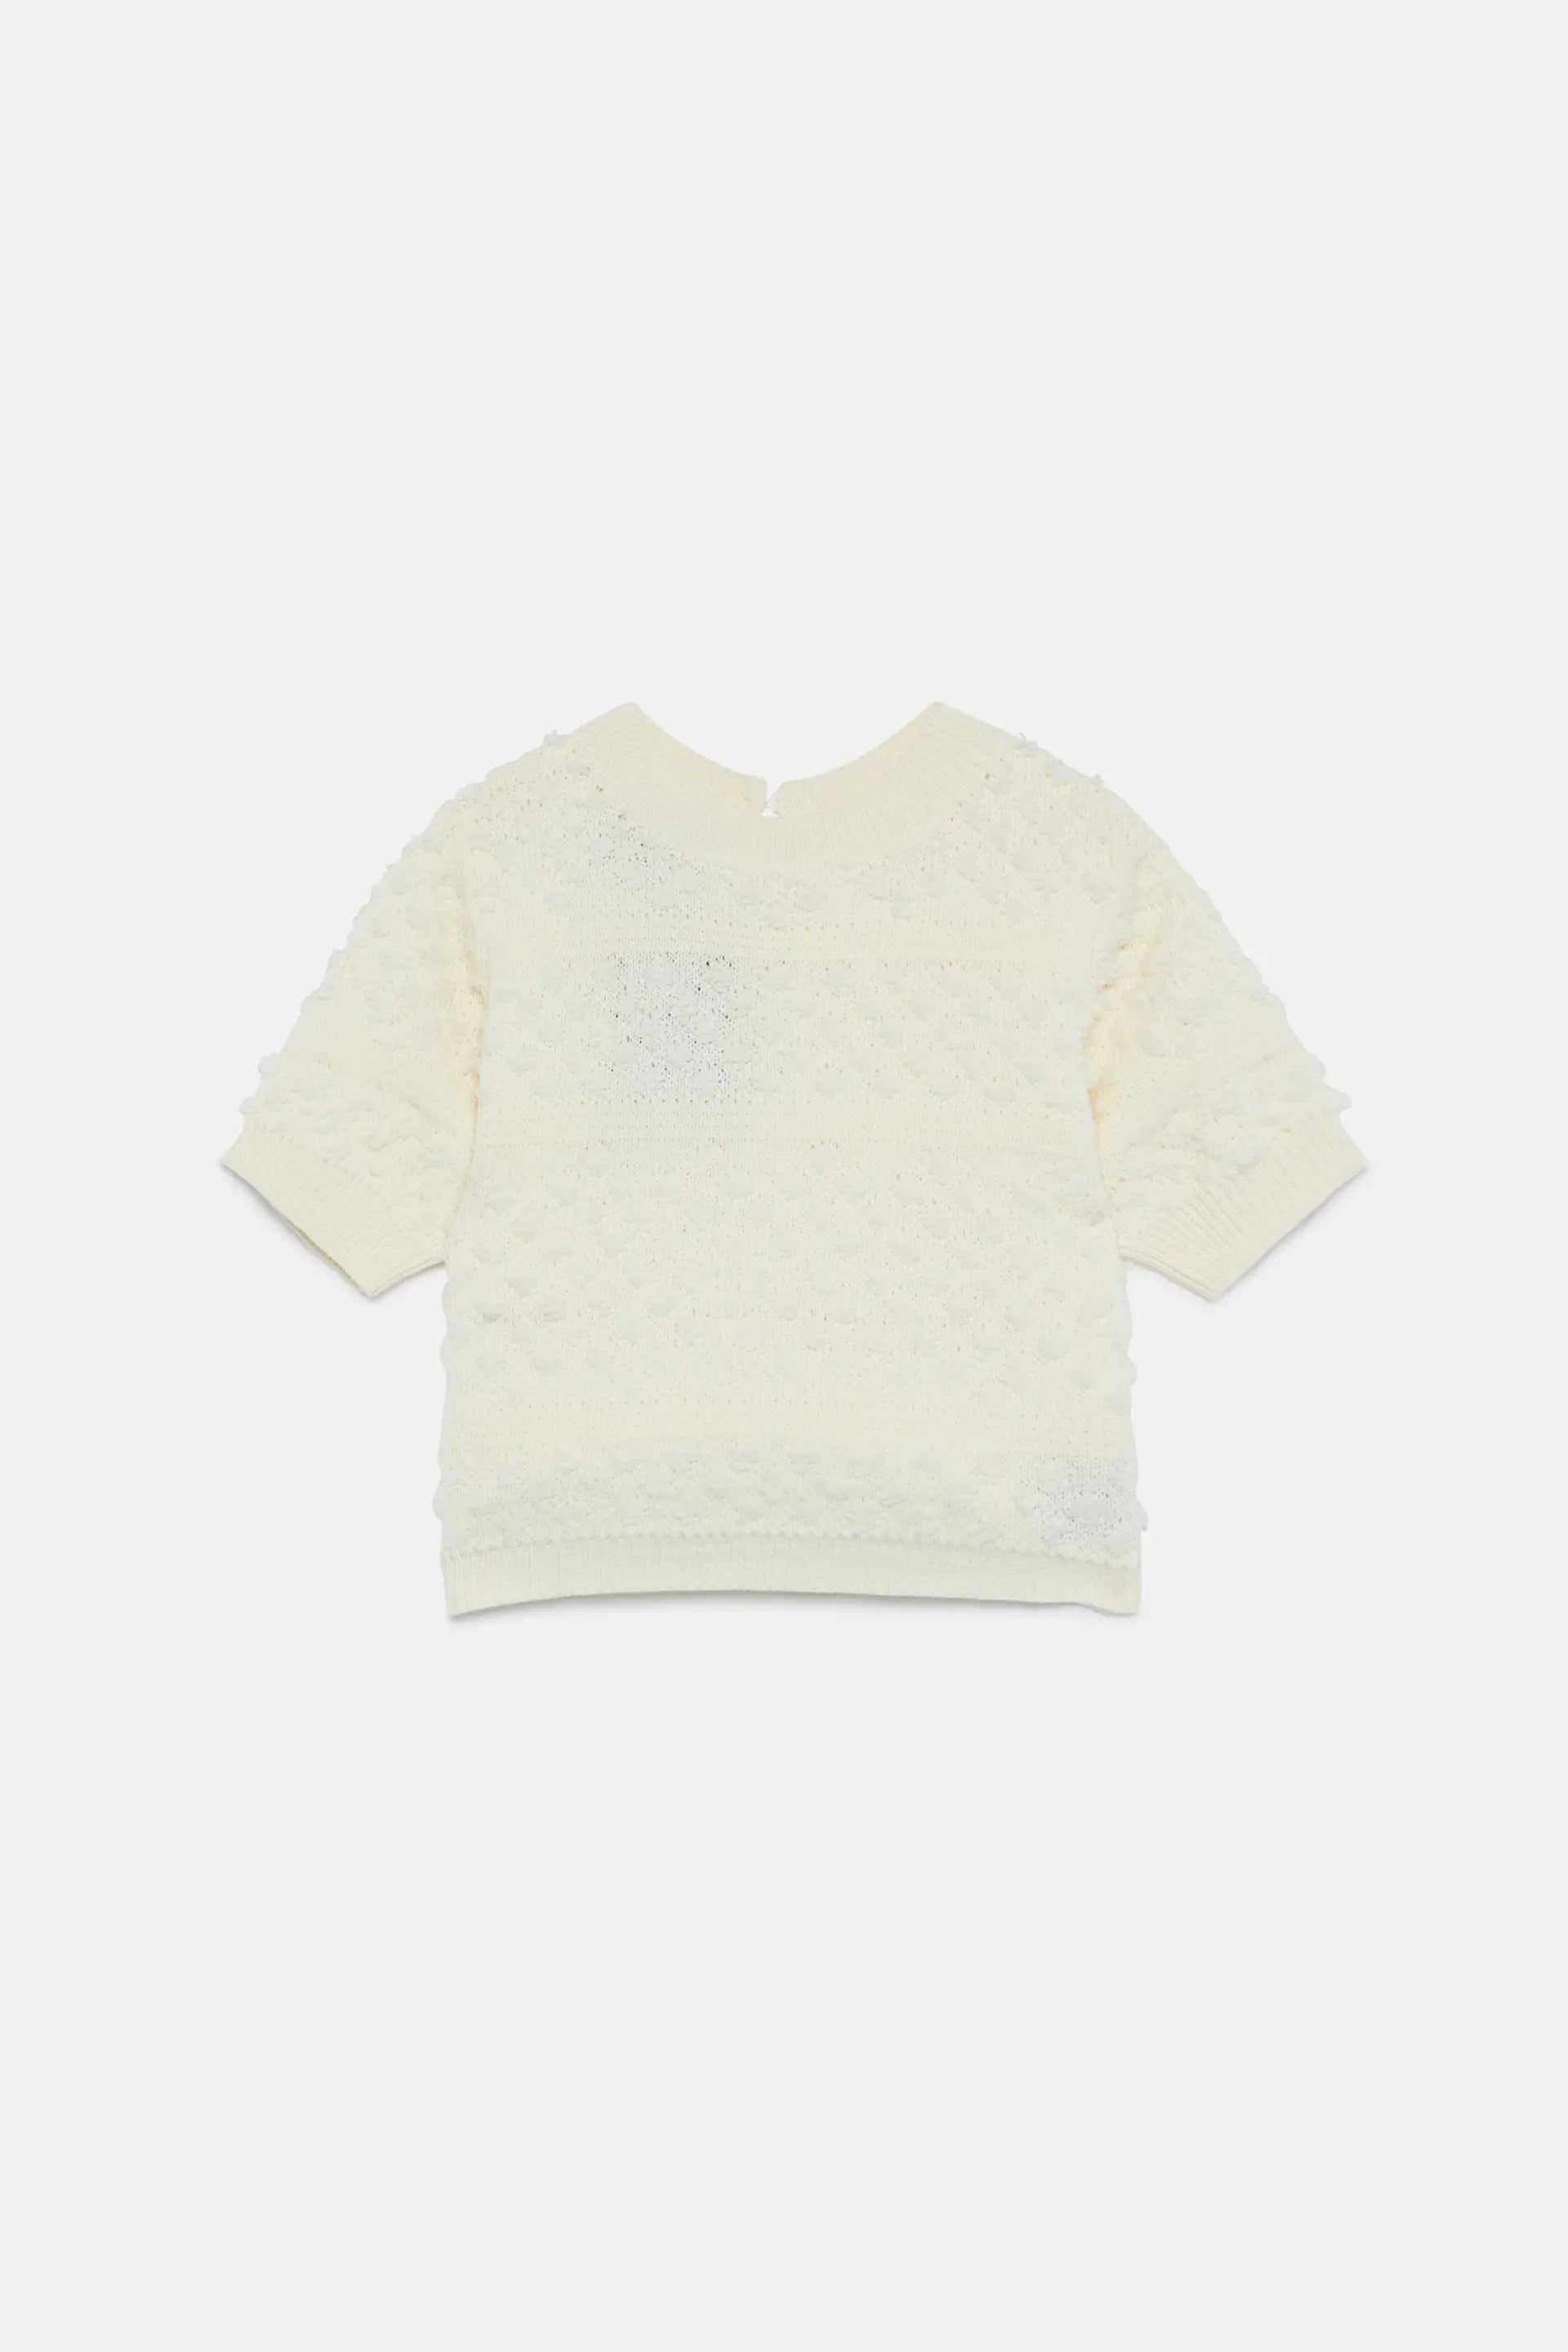 Wild Pony White short sleeve knitted sweater - clever alice